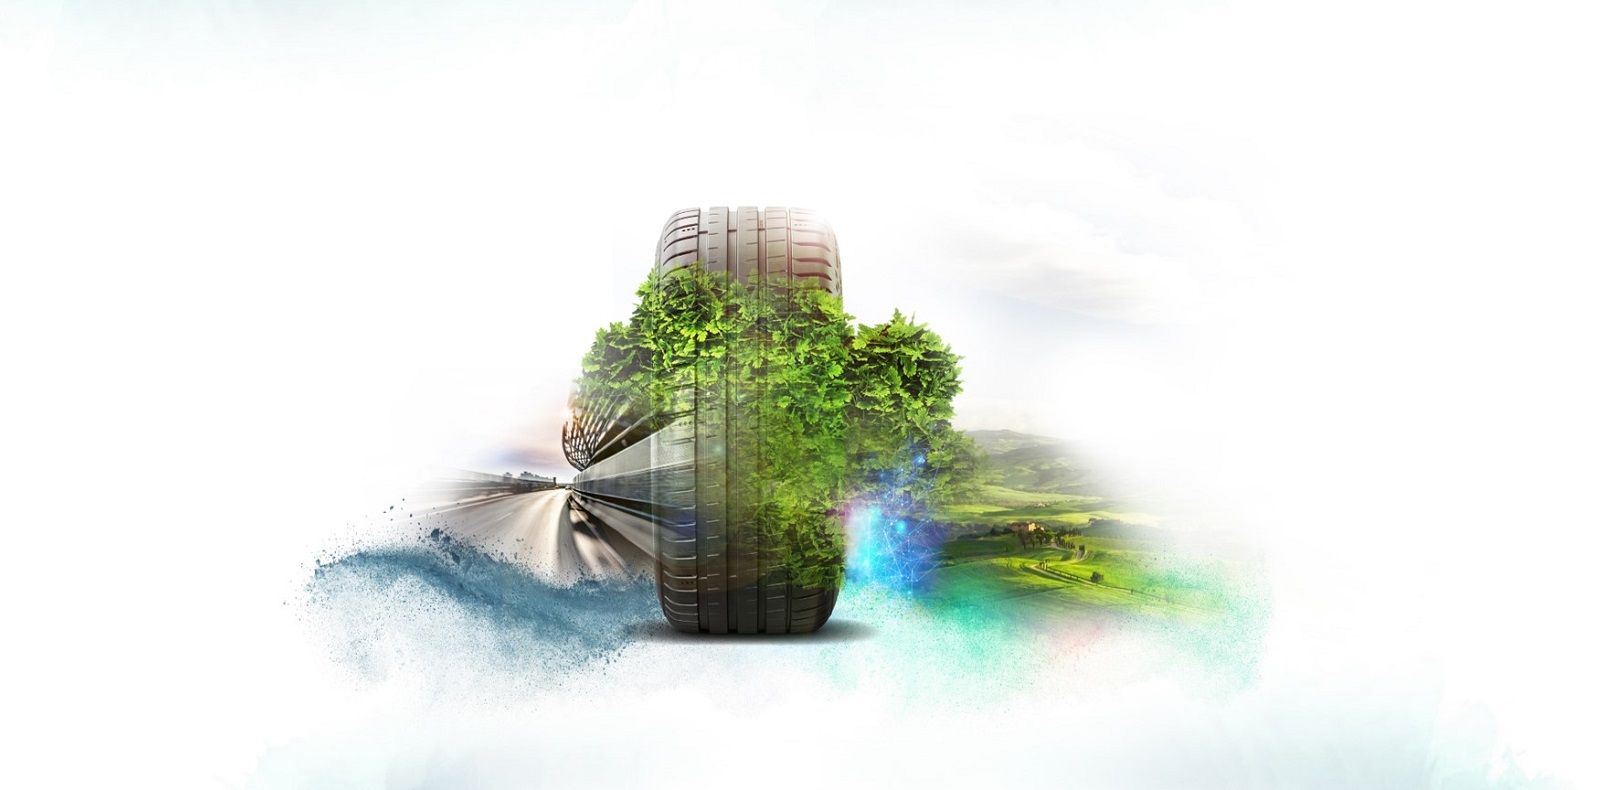 NEWS_9-Sustainable_Rubber_Production_For_Falken_Tyres.jpg